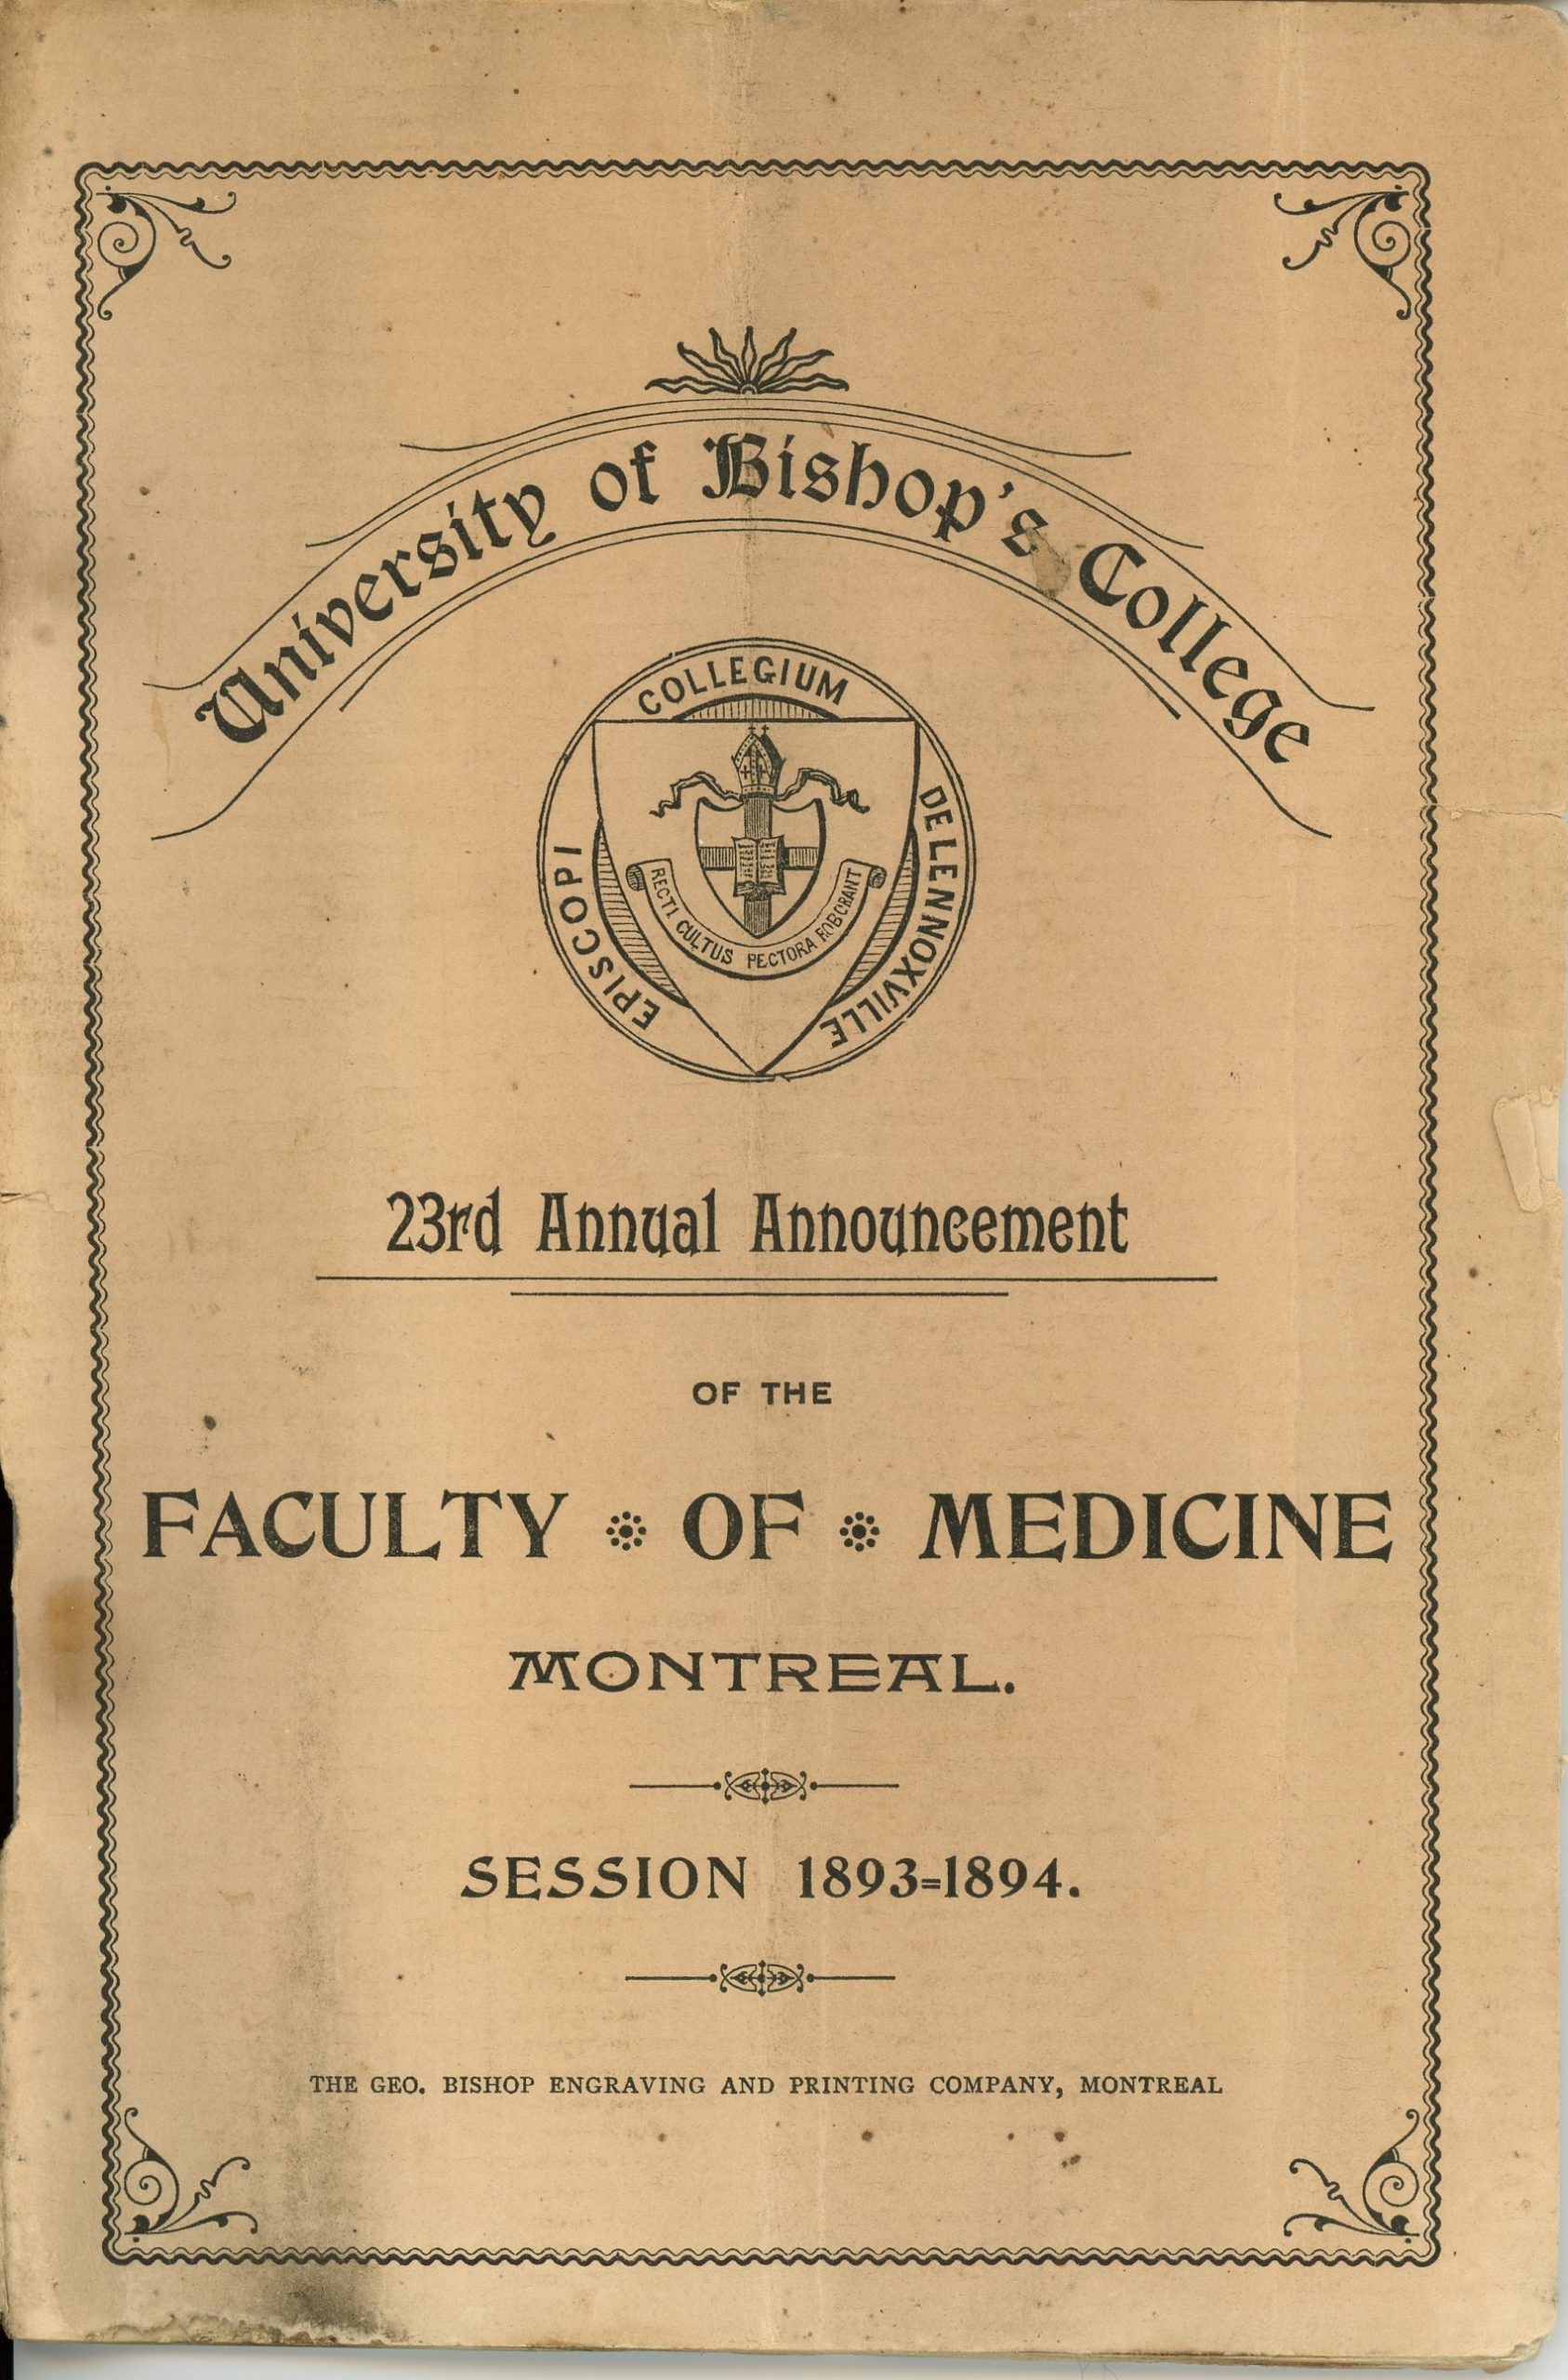 Cover page of a University of Bishop’s College booklet, black ink on sepia paper. A semicircular banner at the top reads “University of Bishop’s College”. Below the banner is the coat of arms of the University of Bishop’s College. The coat of arms is encircled by the words “Espiscopi Collegium De Lennoxville”. The following text is displayed under the coat of arms: “23rd Annual Announcement Of the Faculty of Medicine Session 1893-1894 The Geo. Bishop Engraving and Printing Company, Montreal”